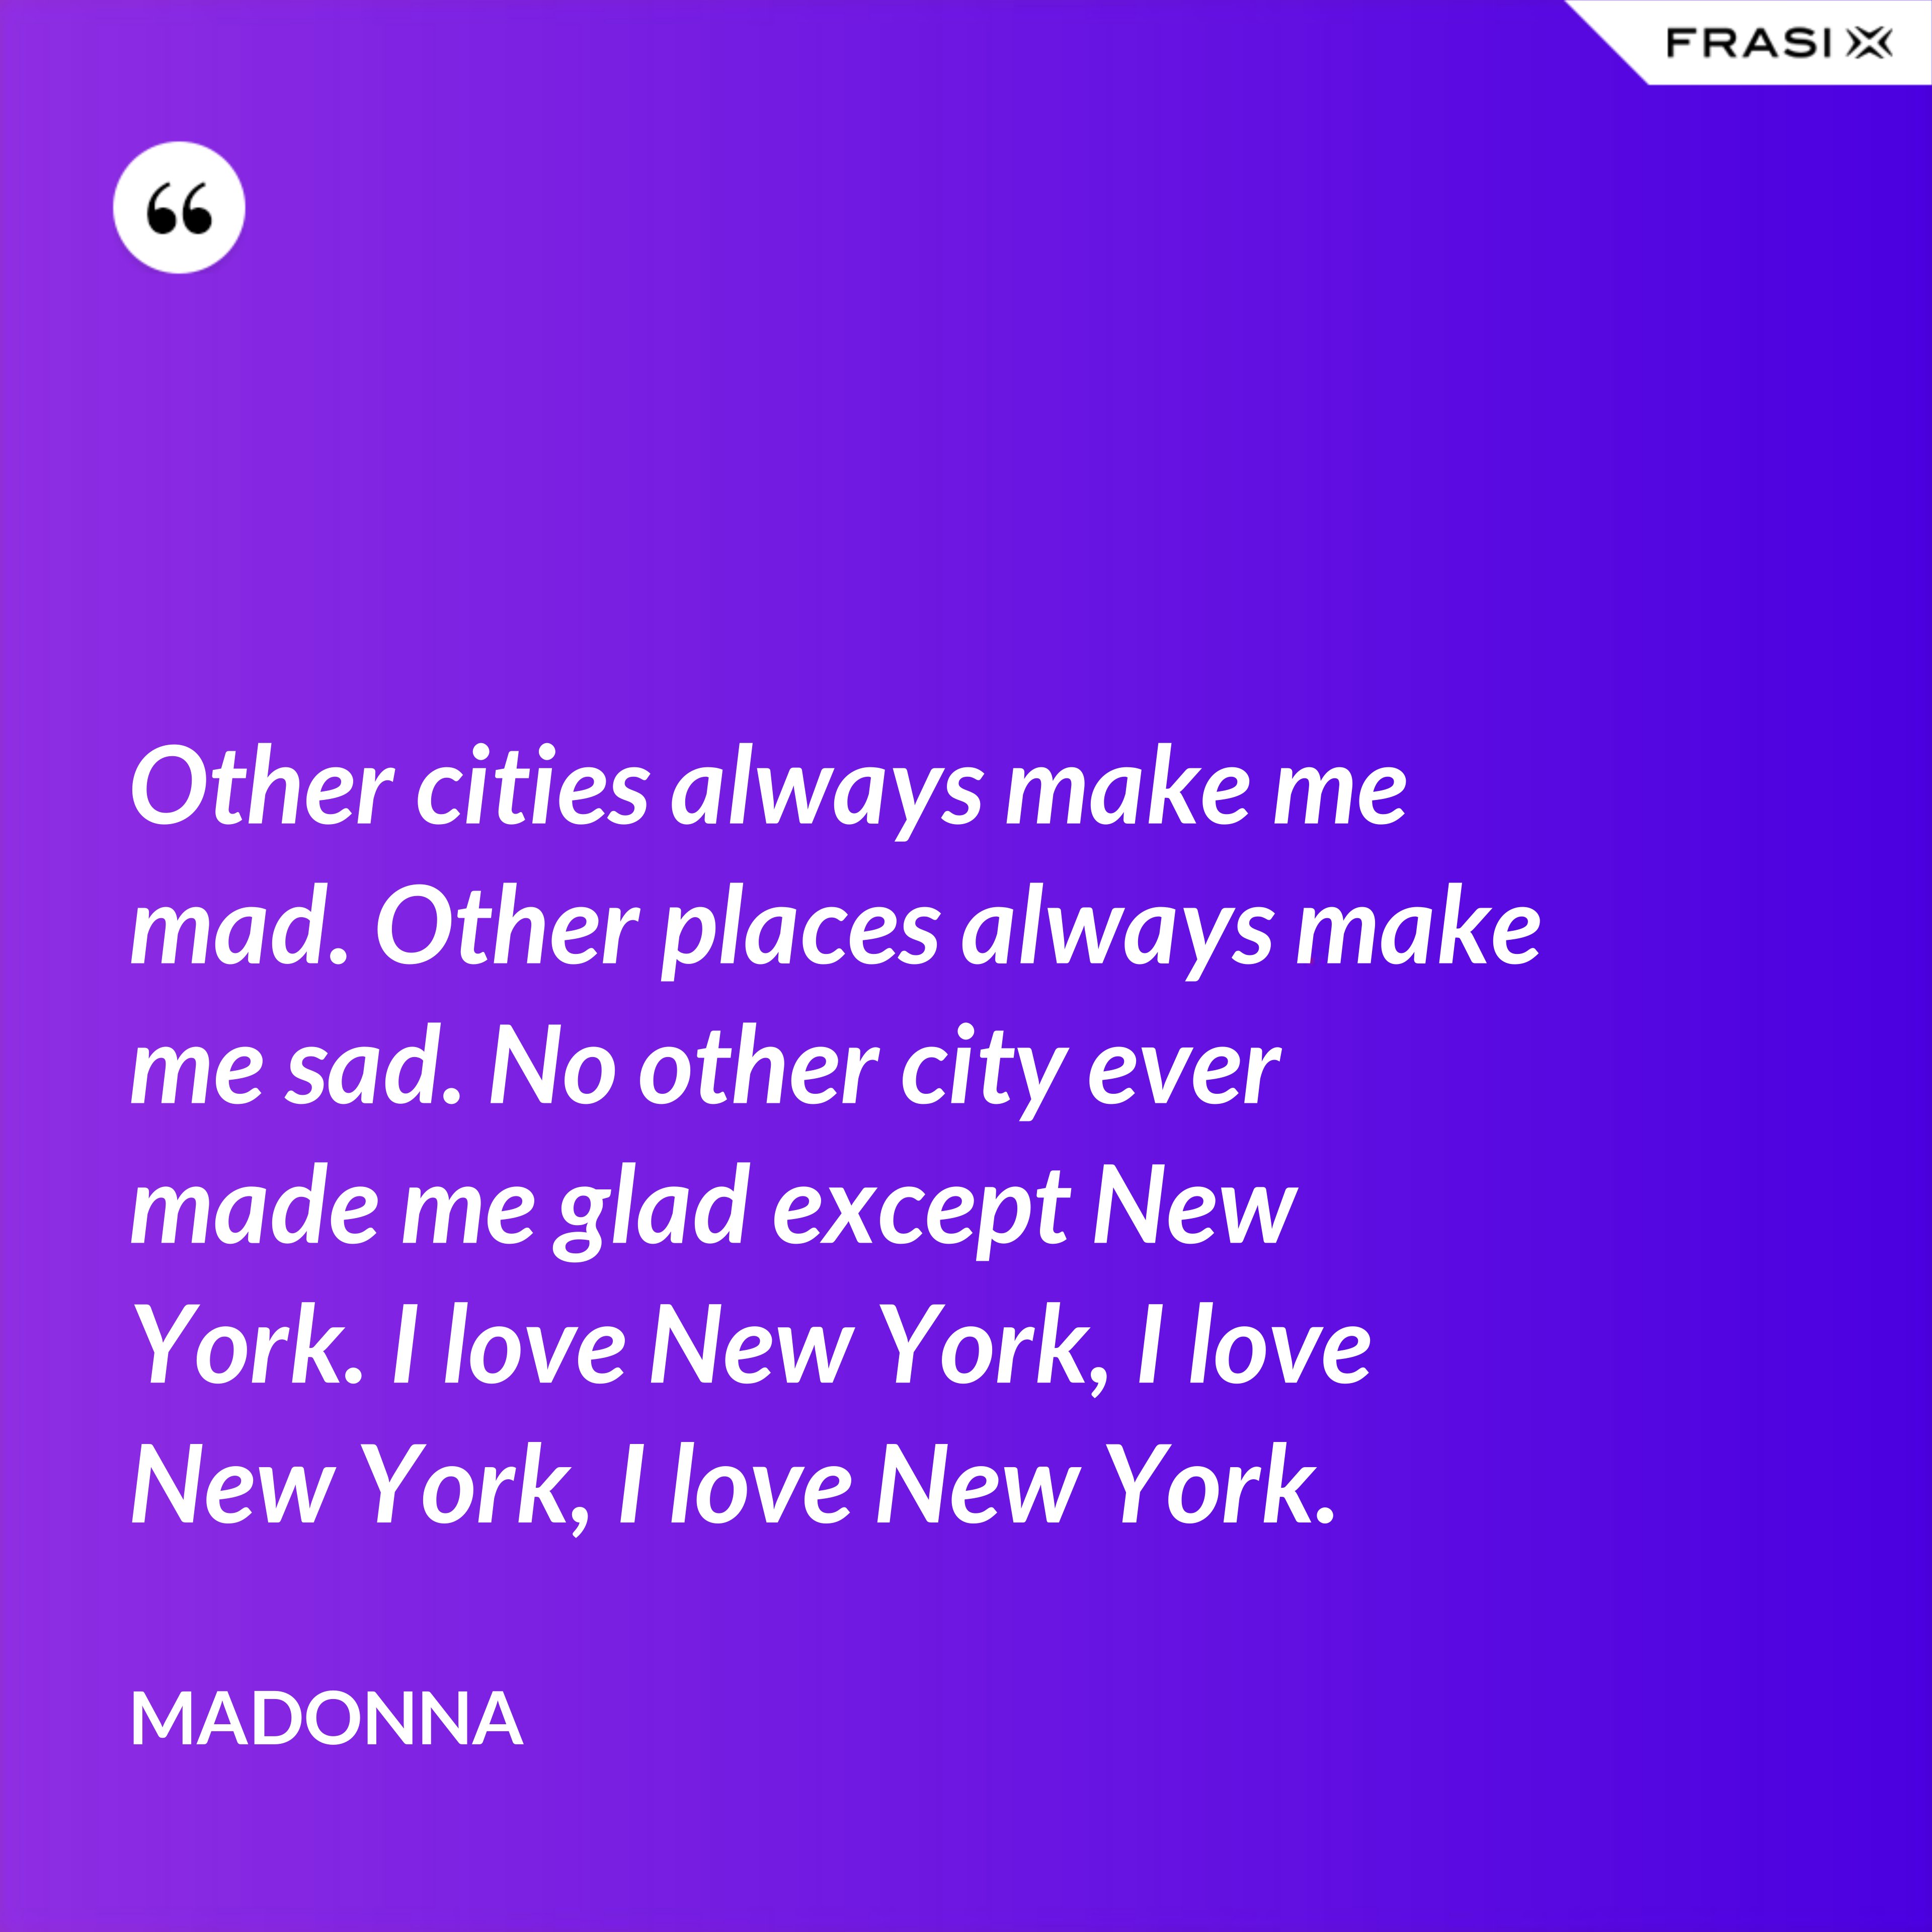 Other cities always make me mad. Other places always make me sad. No other city ever made me glad except New York. I love New York, I love New York, I love New York. - Madonna